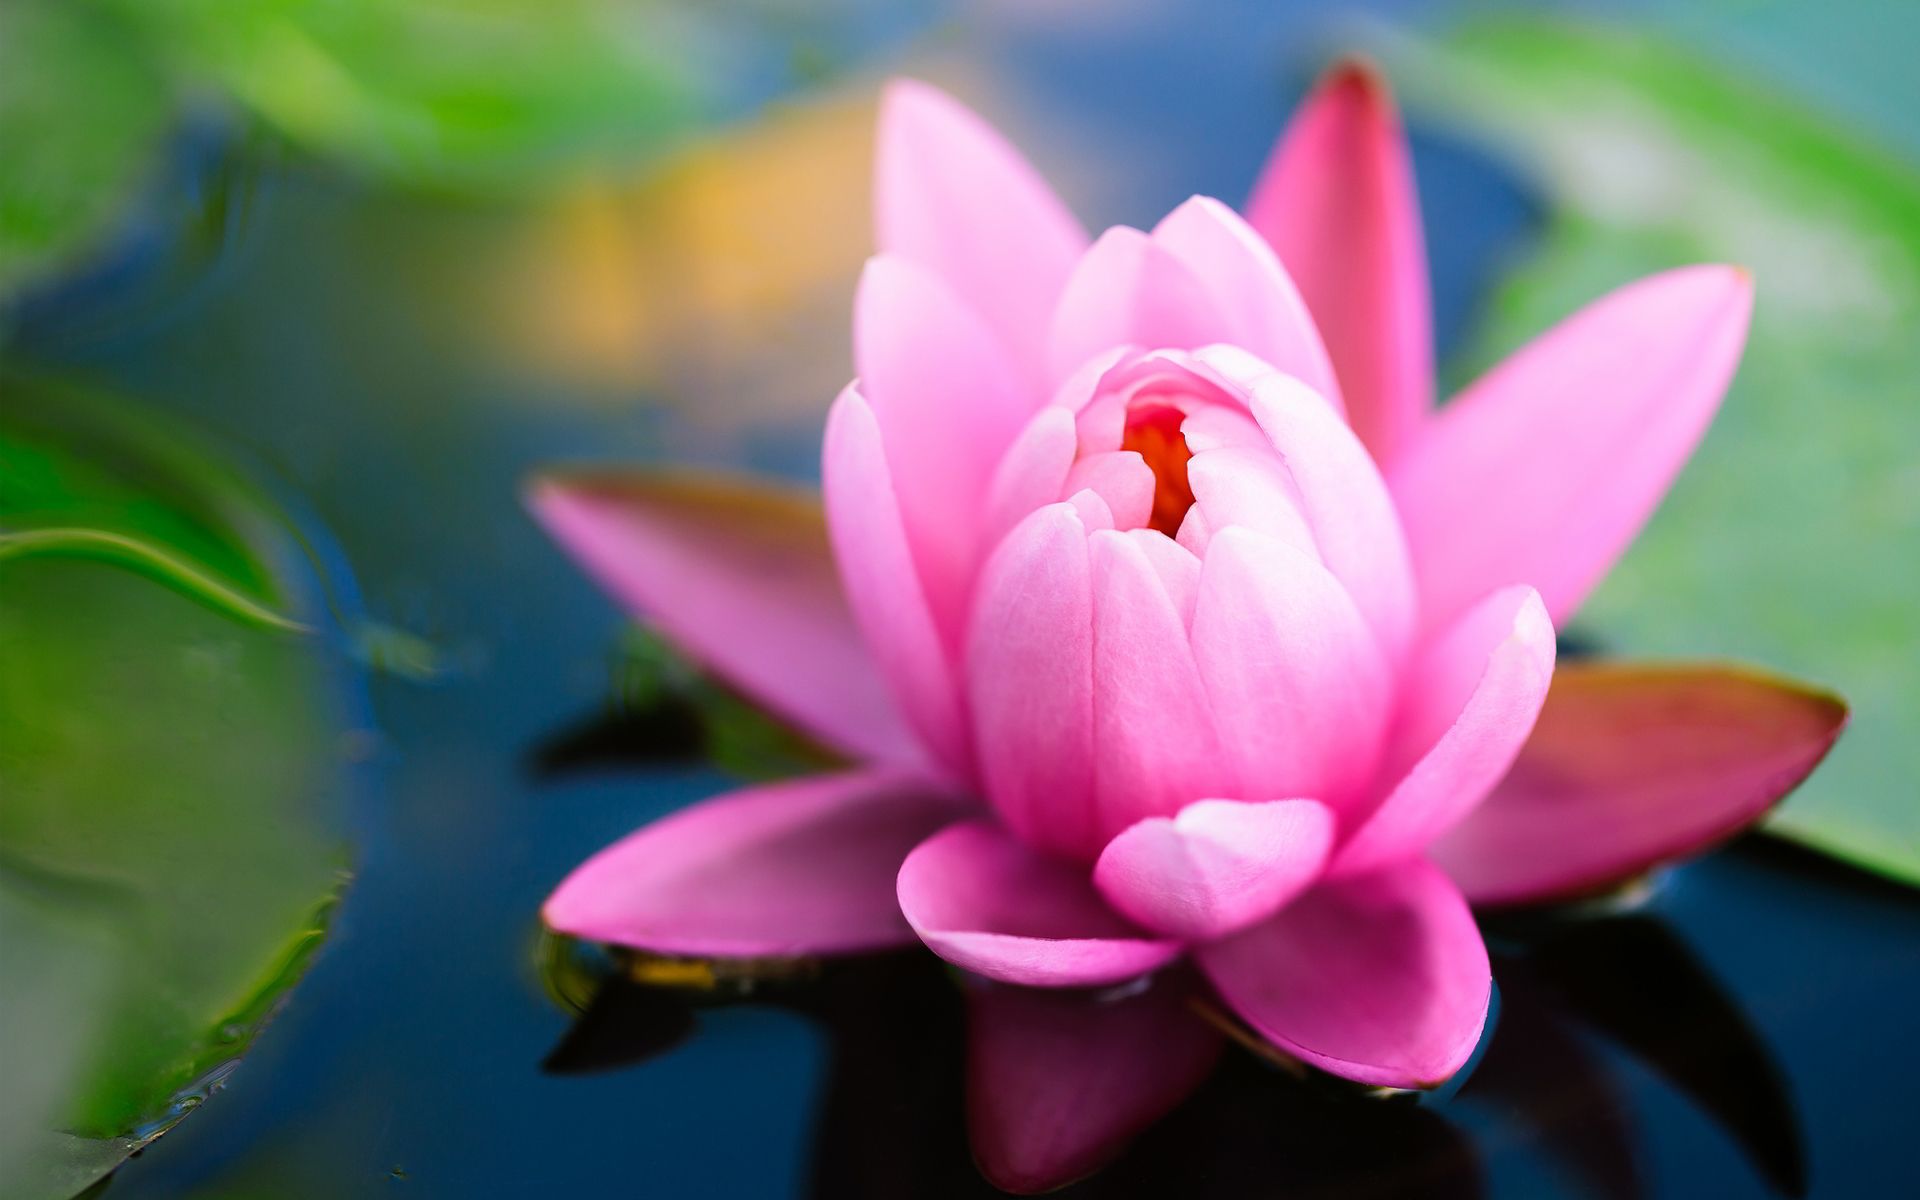 Pink Flower Tumblr Wallpaper For Android for Desktop 1920x1200 px ...